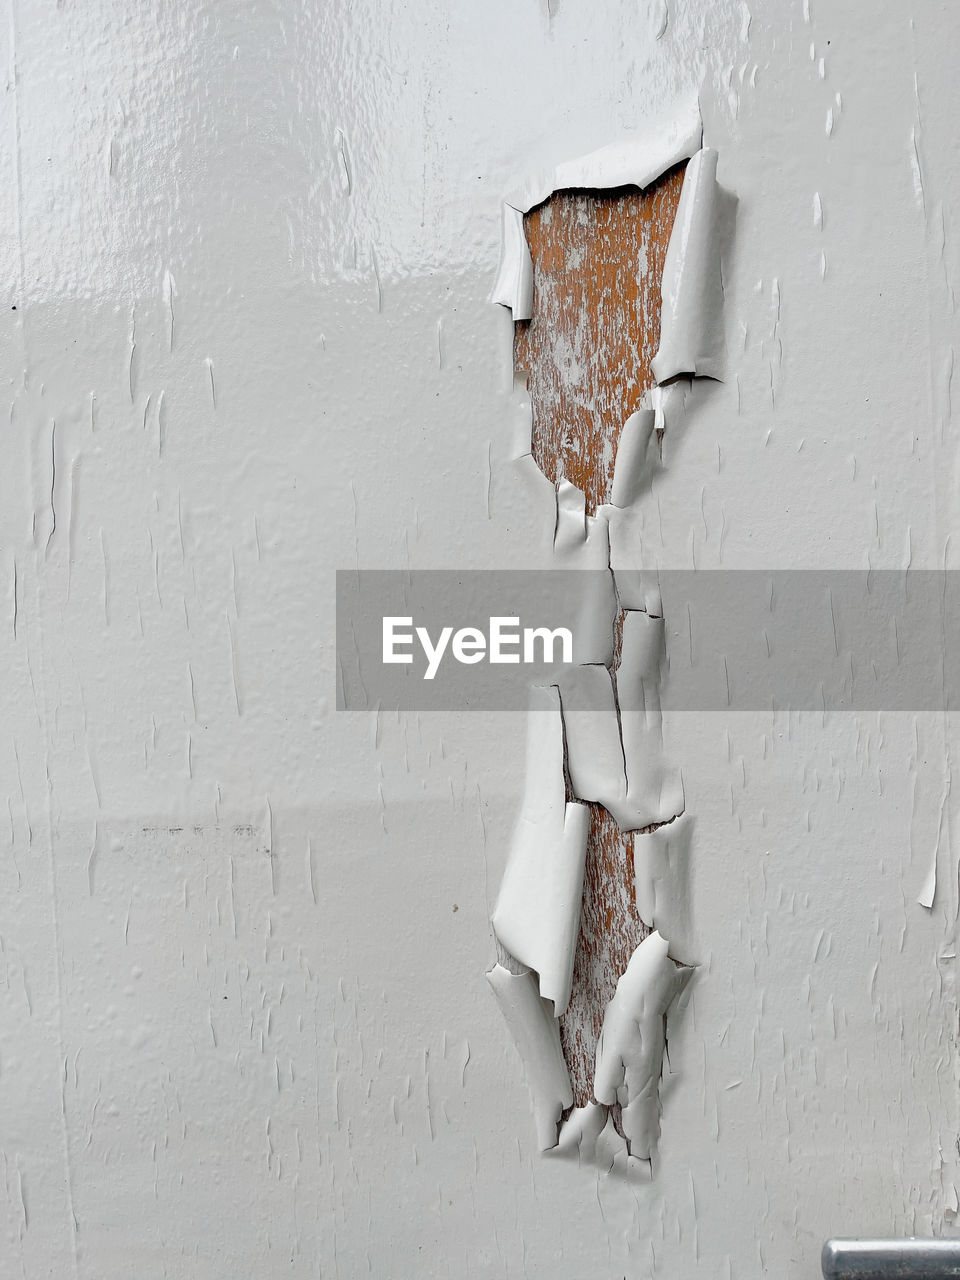 wall, wall - building feature, white, damaged, no people, built structure, architecture, broken, day, plaster, wood, old, peeling off, close-up, indoors, textured, weathered, cracked, abandoned